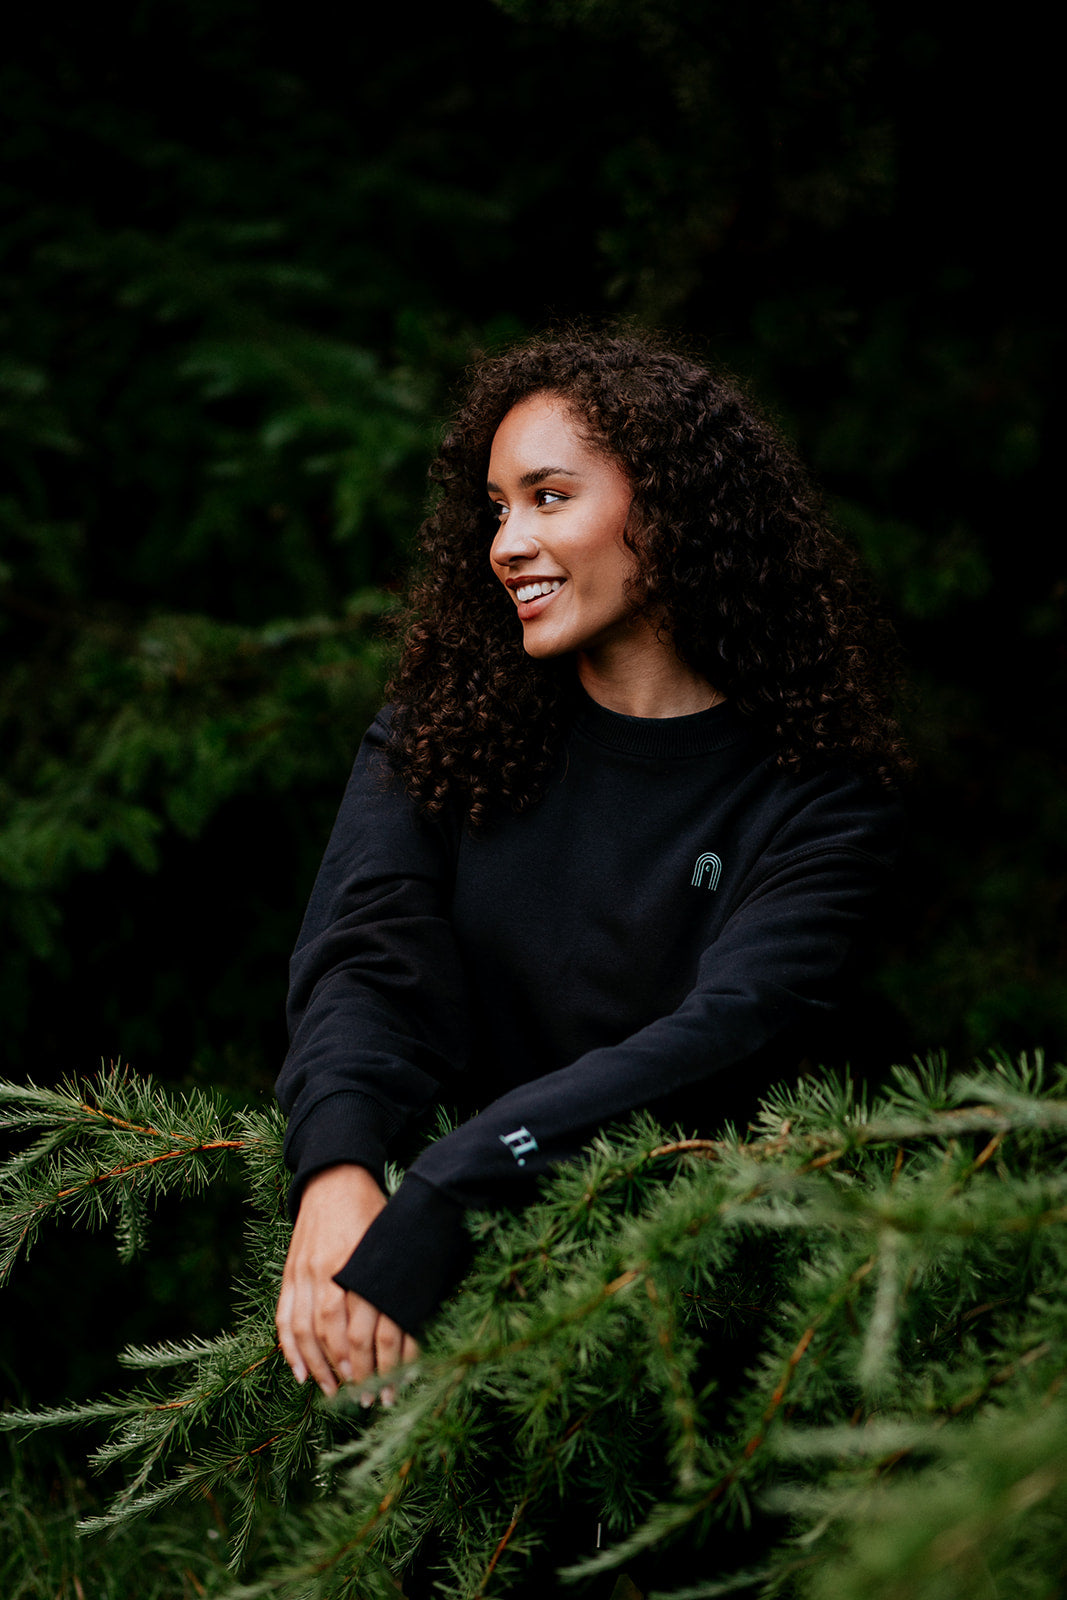 Close up of a woman wearing a black sweatshirt in a forest